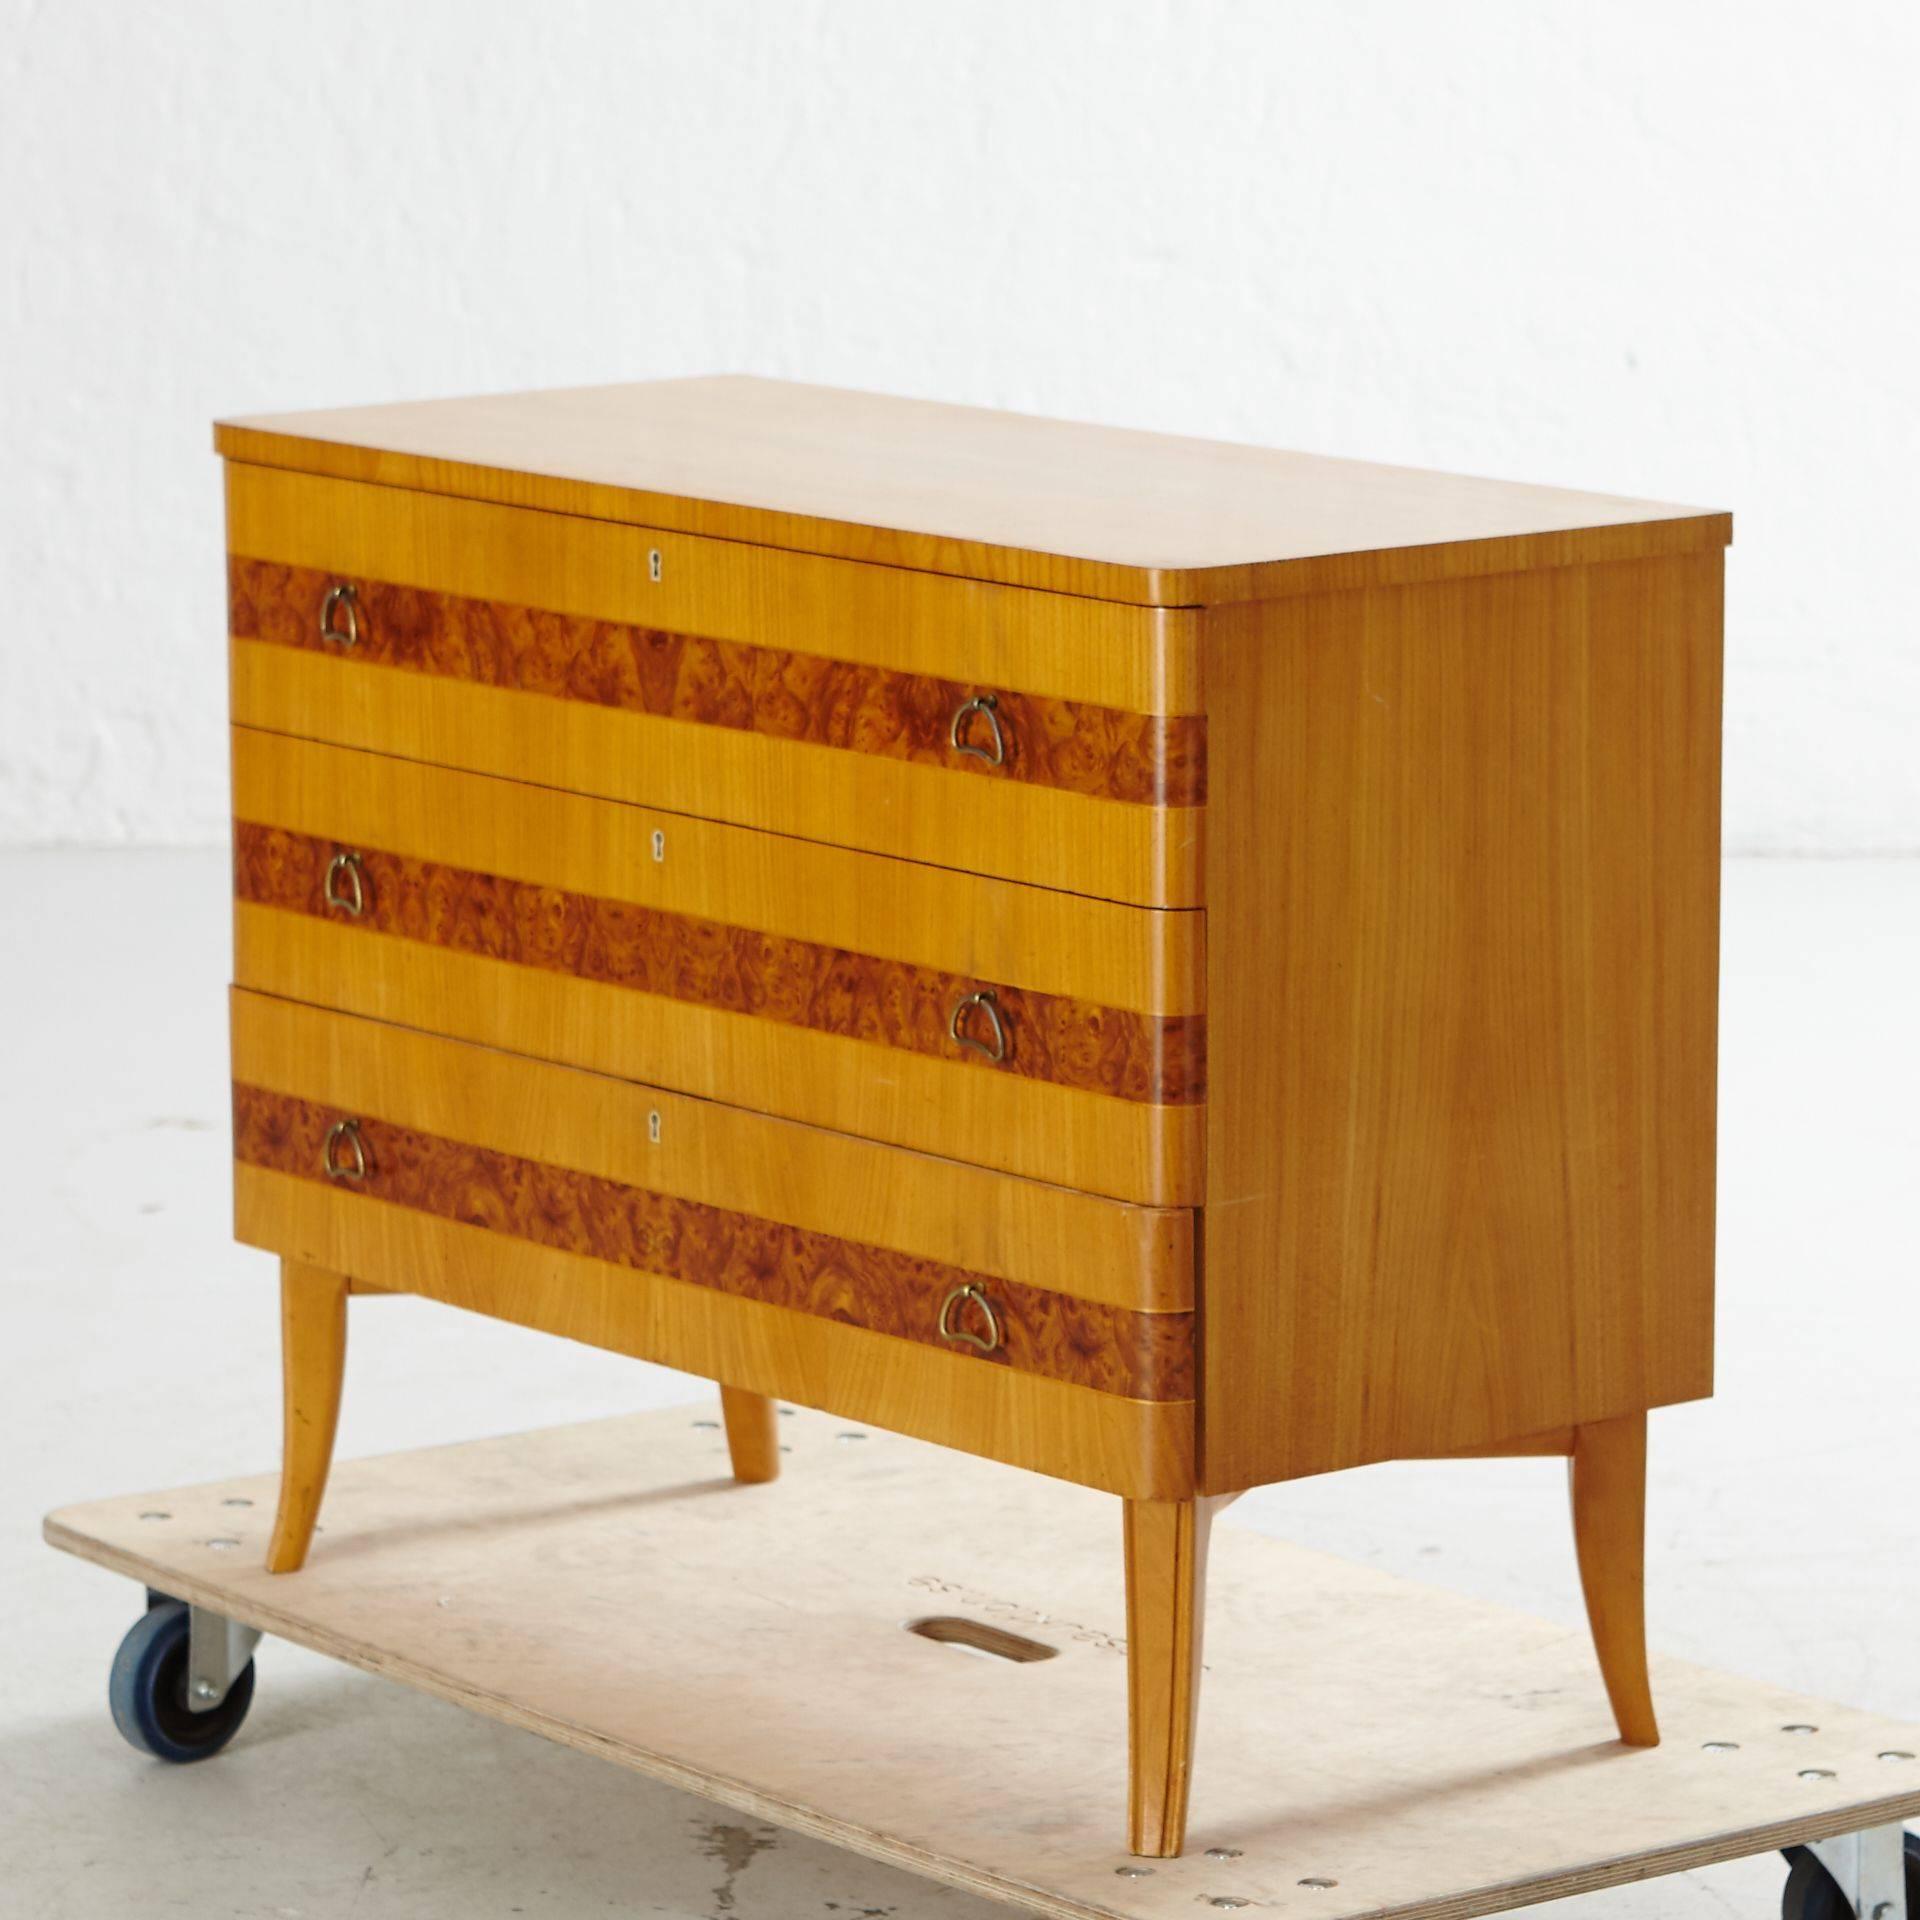 Swedish art moderne three-drawer dresser in elm and carpathian elm. Designed by Axel Larsson. Original metal pulls. Four saber legs. Original key. Restored and in pristine condition. Made at Bodafors in Southern Sweden in the 1940s. Contact us for